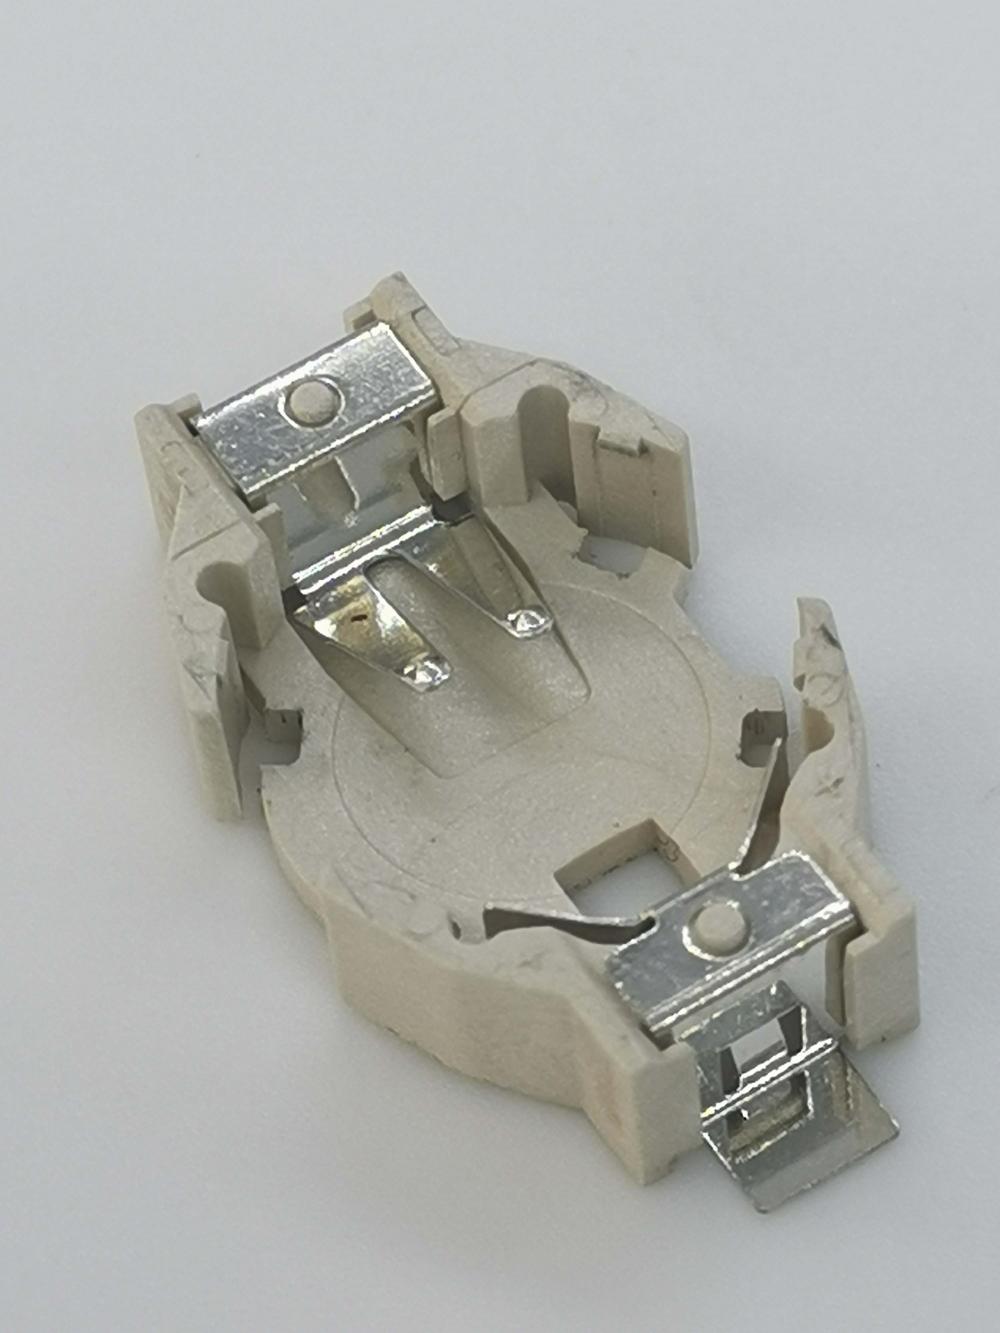 CR1225C Coin Cell Battery Holder Connector